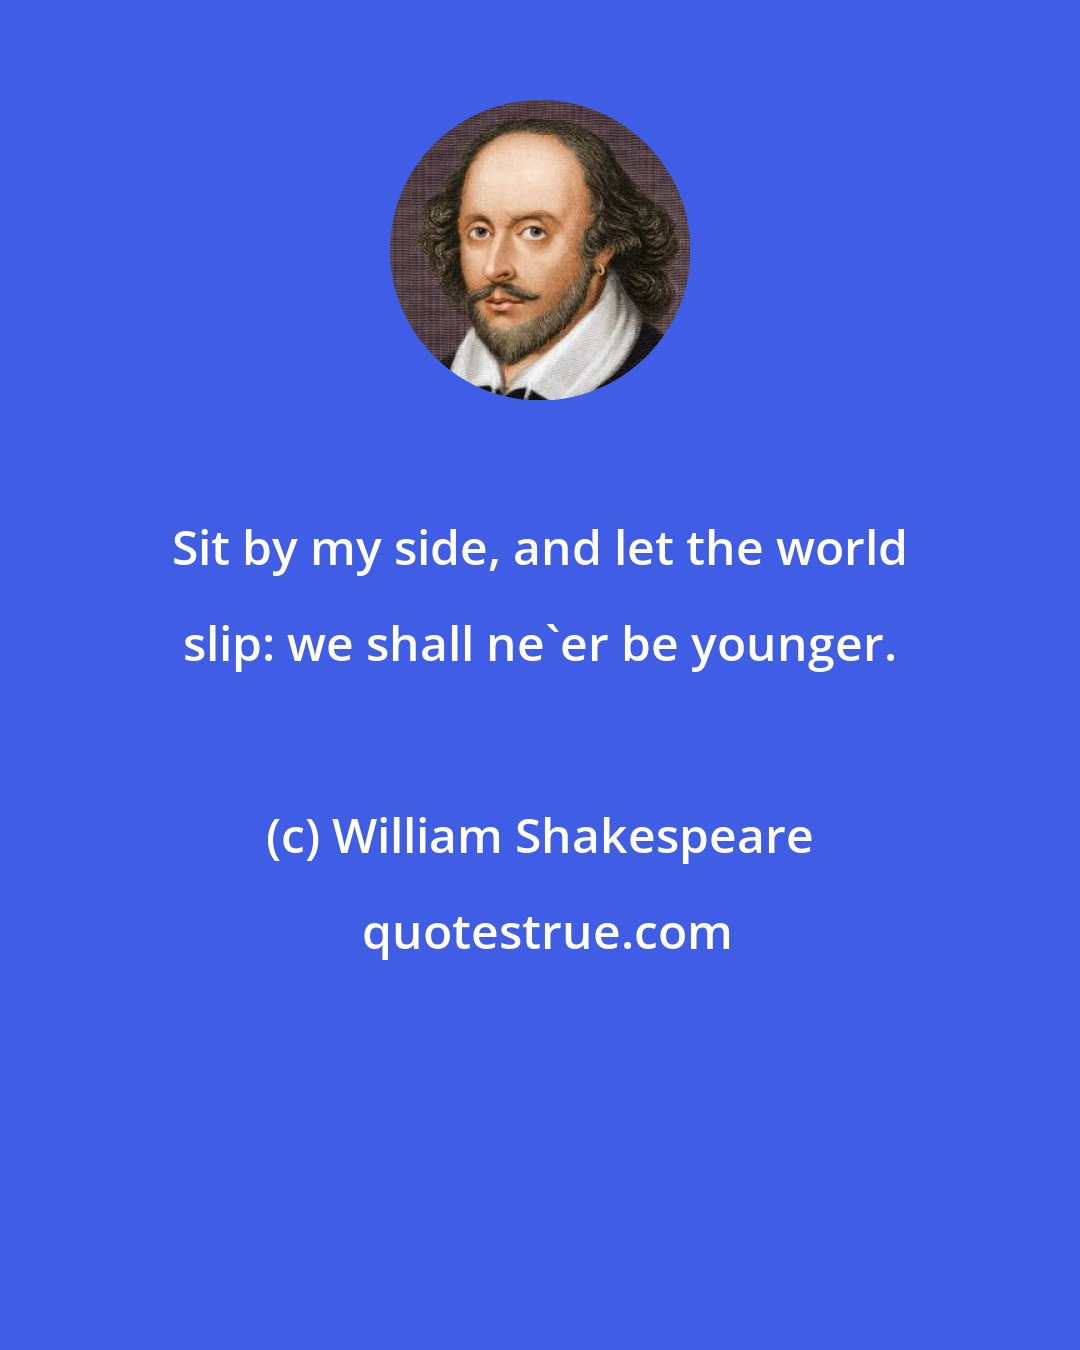 William Shakespeare: Sit by my side, and let the world slip: we shall ne'er be younger.